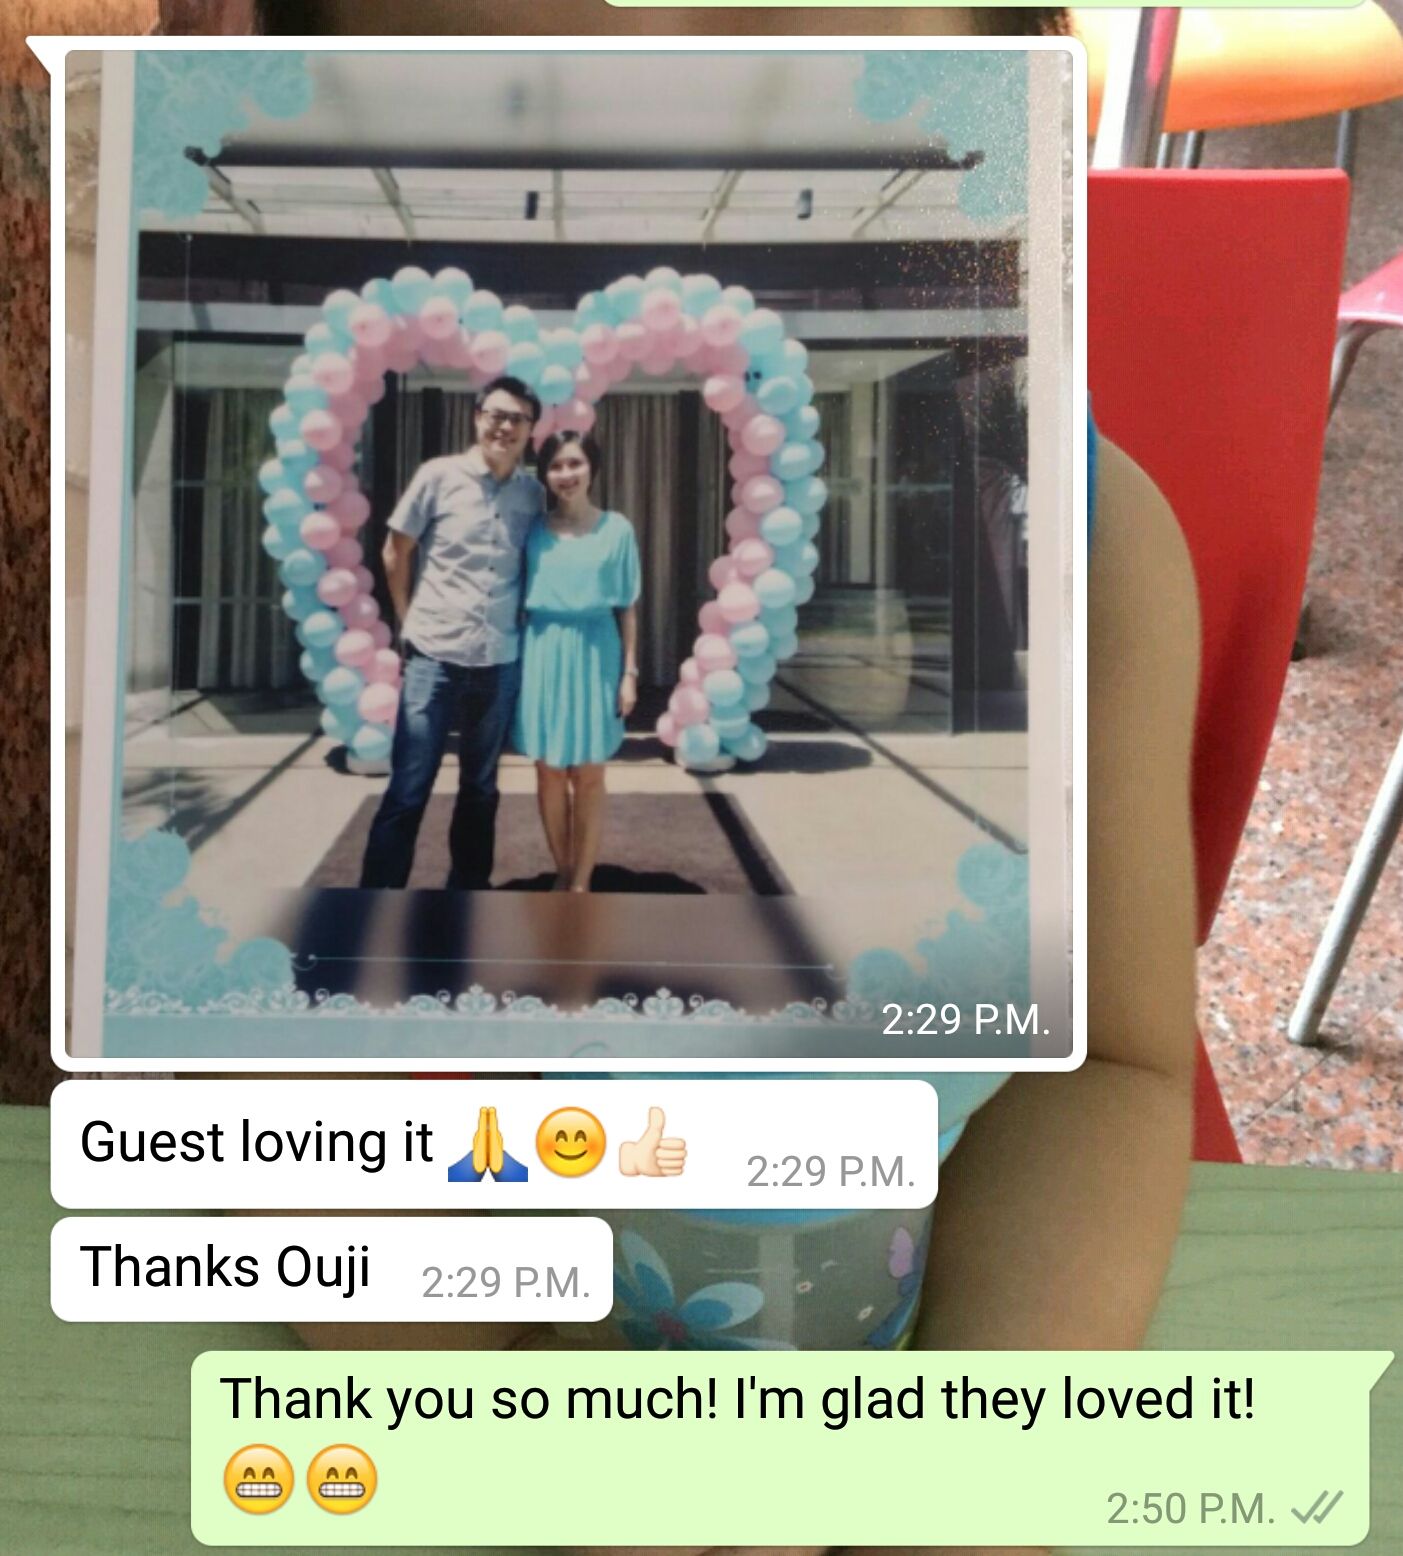 , Heart Shaped balloon arch for weddings and events!, Singapore Balloon Decoration Services - Balloon Workshop and Balloon Sculpting